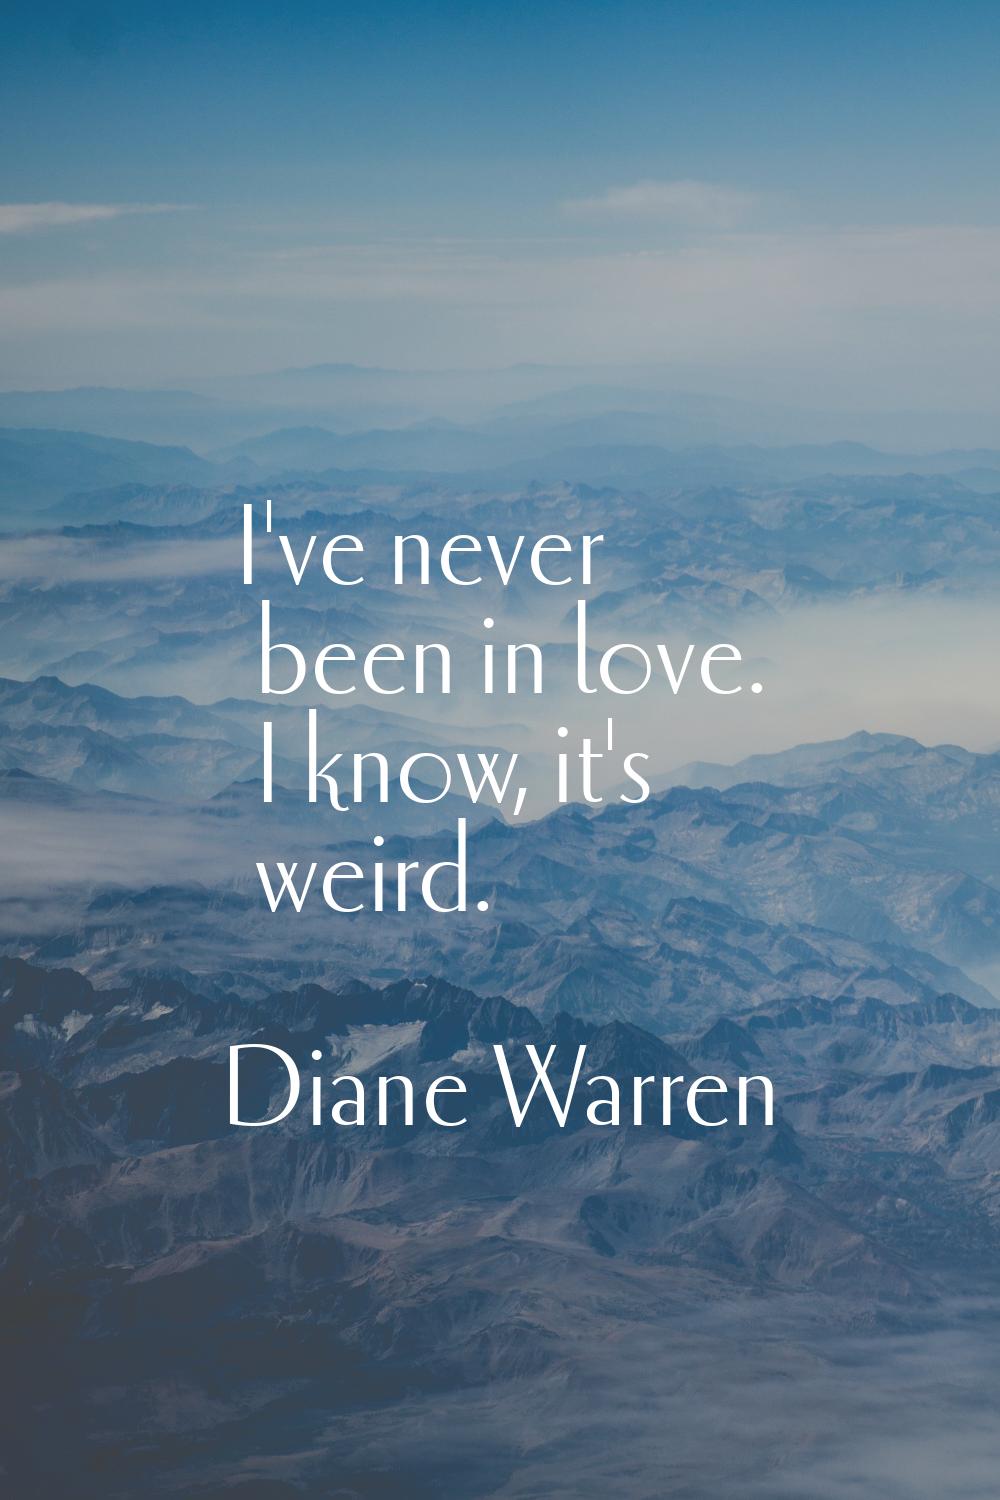 I've never been in love. I know, it's weird.